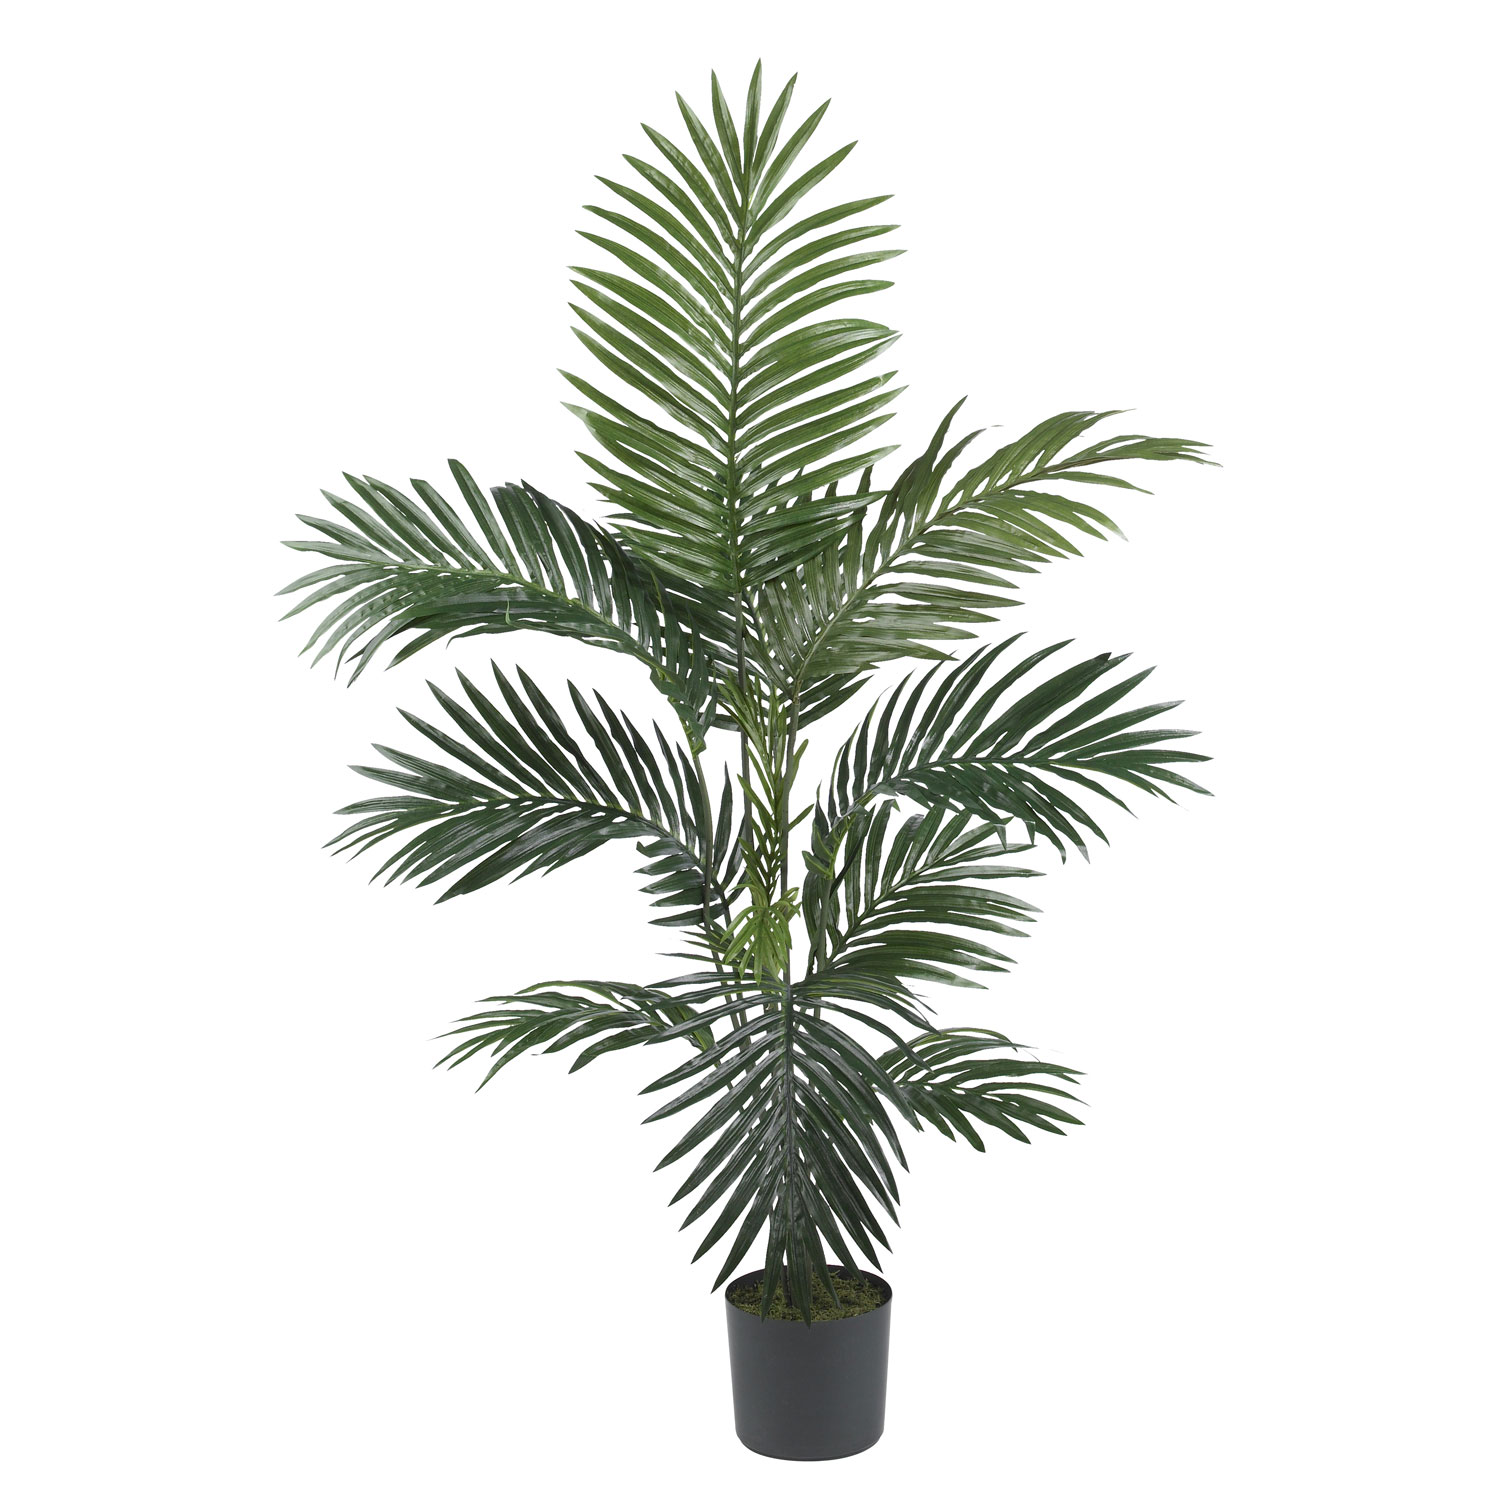 4 Foot Kentia Palm Tree: Potted